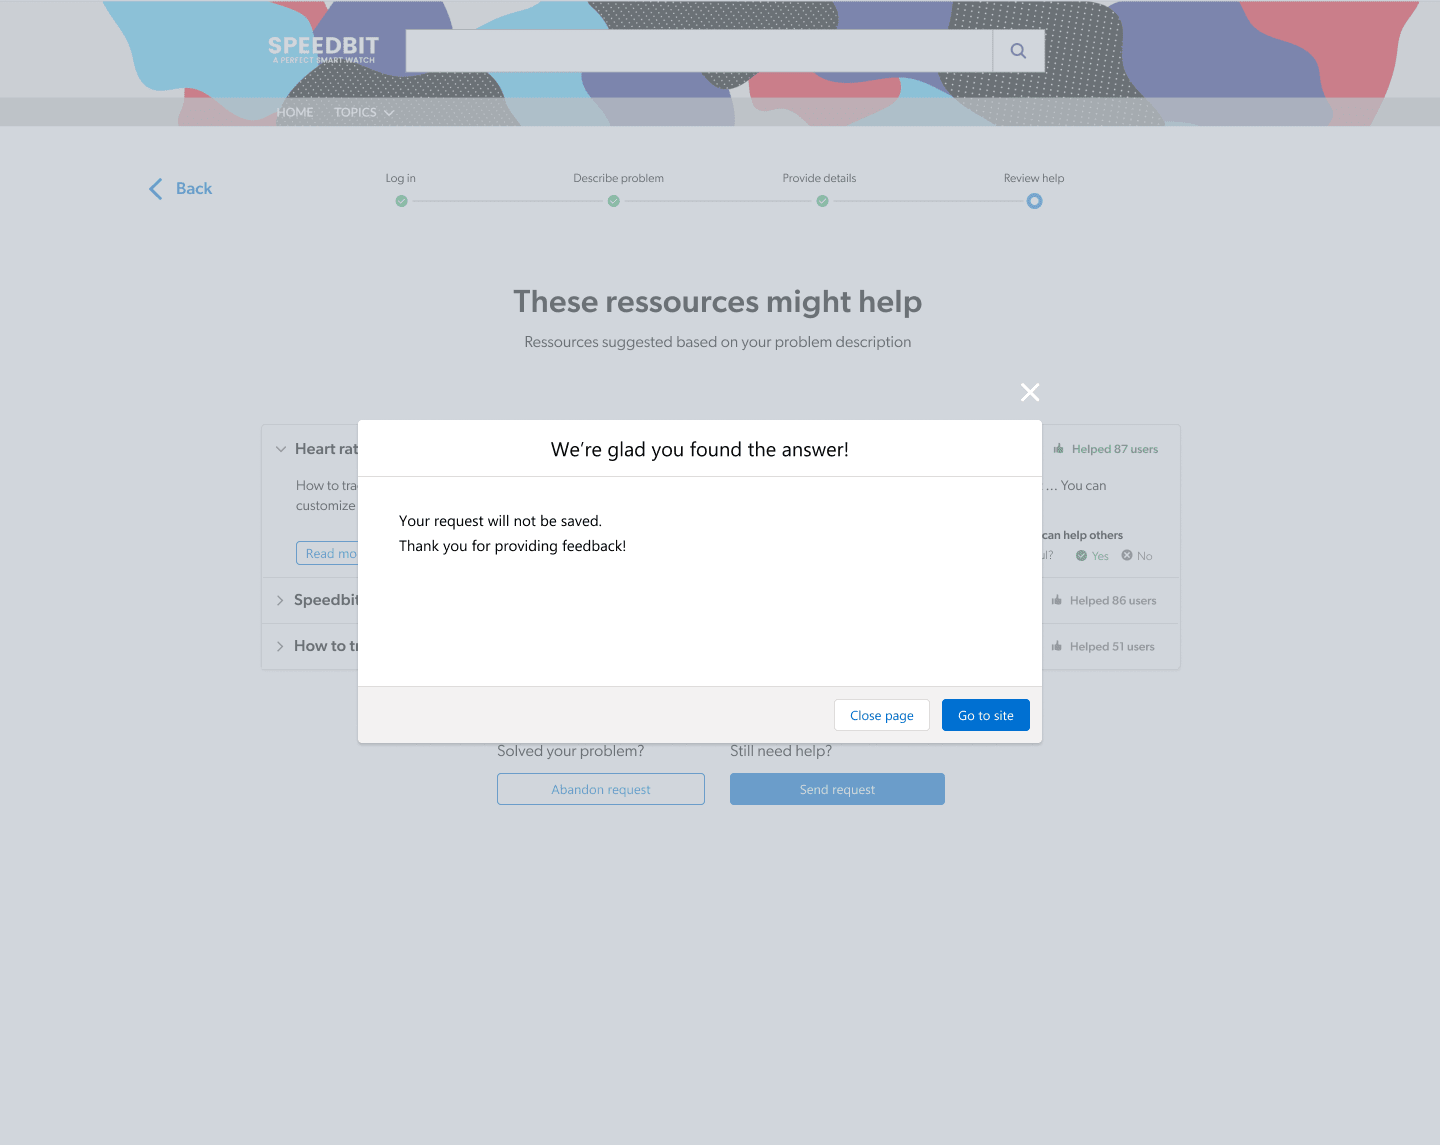 Confirmation modal before abandoning the request